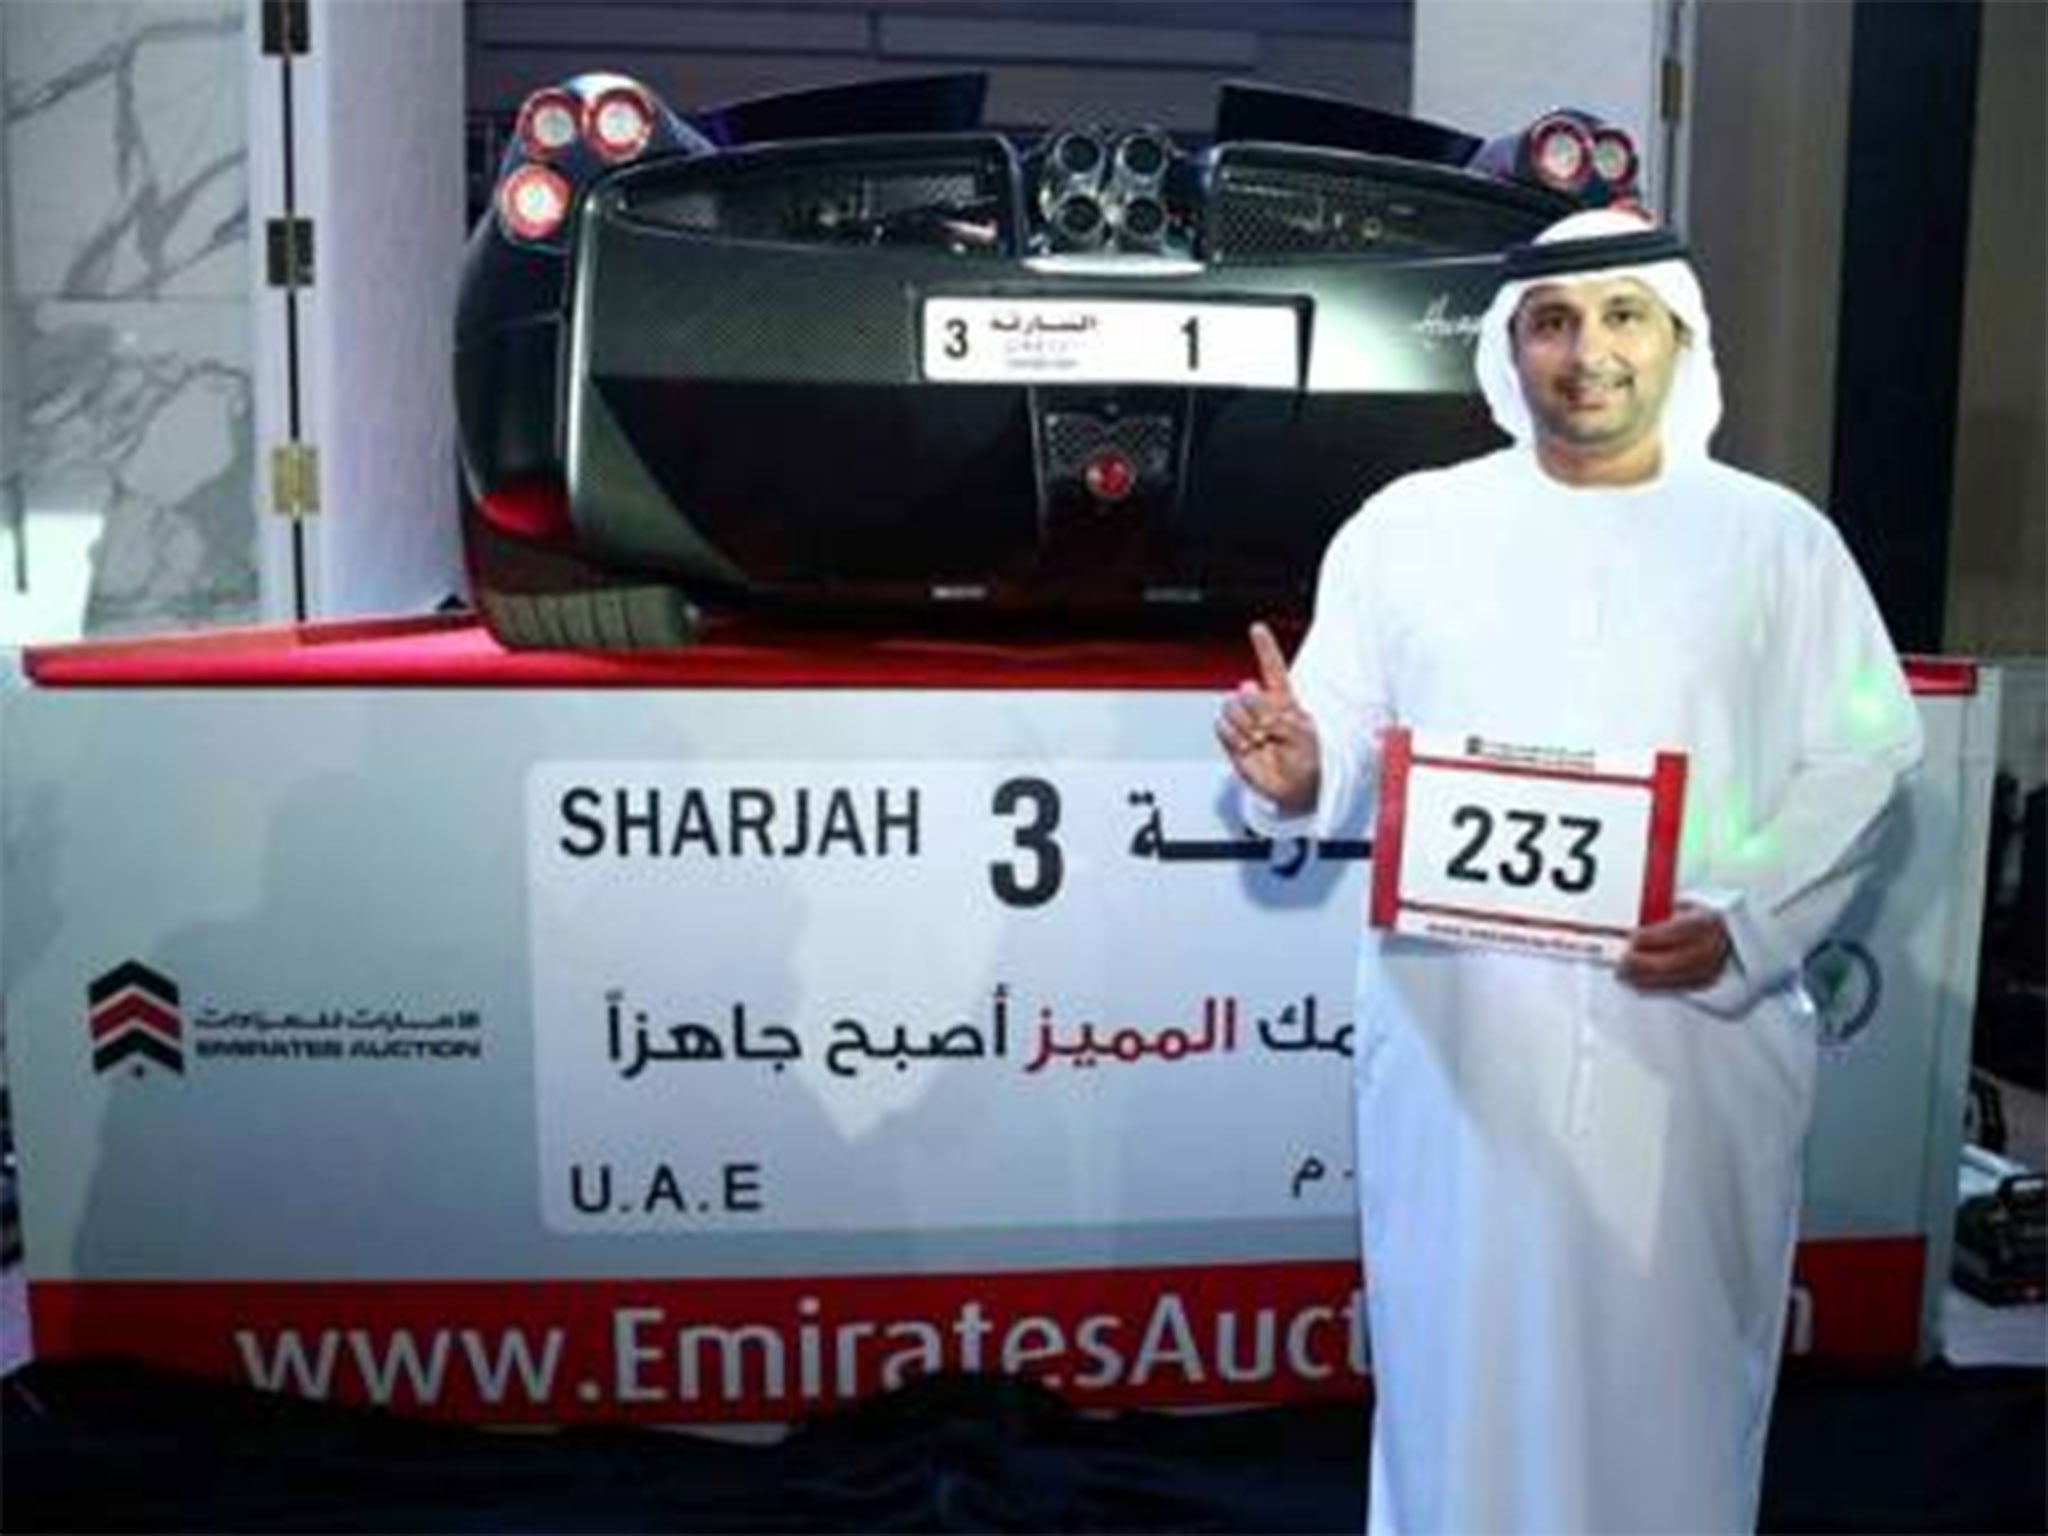 Arif Ahmad al-Zarouni is pictured with his prize